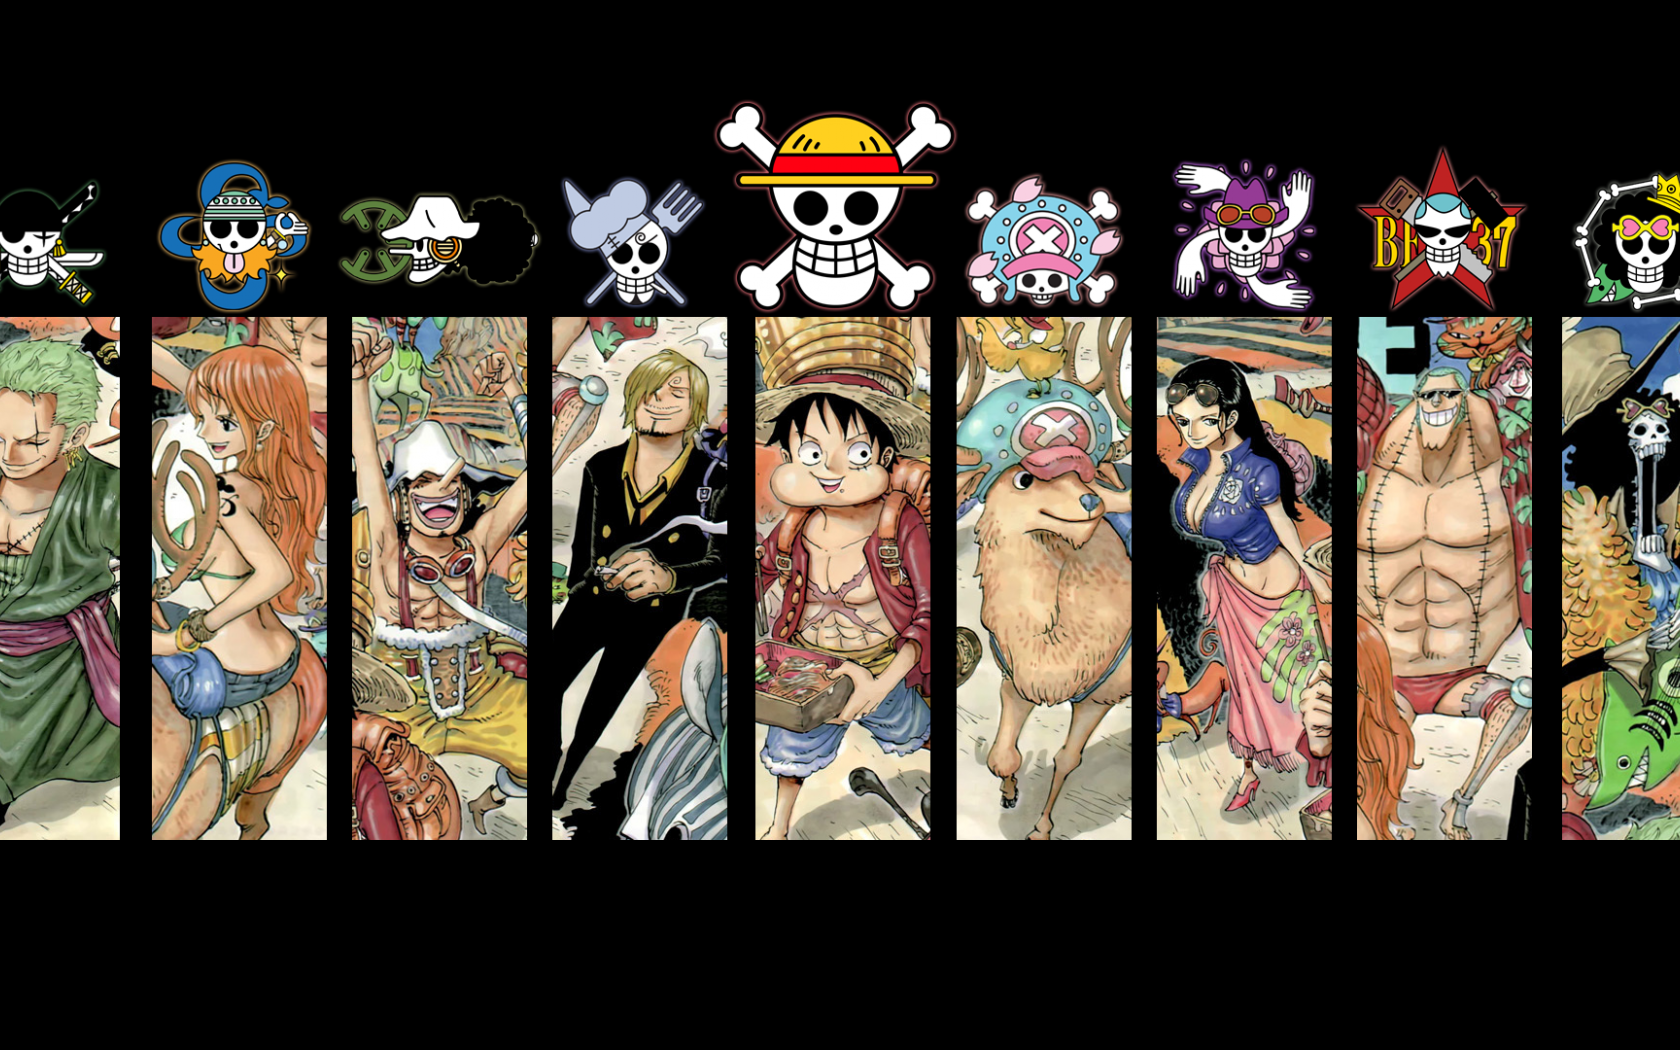 Free download one piece wallpaper 20 HD collections [1920x1080] for your Desktop, Mobile & Tablet. Explore One Piece Anime Wallpaper. One Piece Desktop Wallpaper, Cool One Piece Wallpaper, One Piece Wallpaper HD